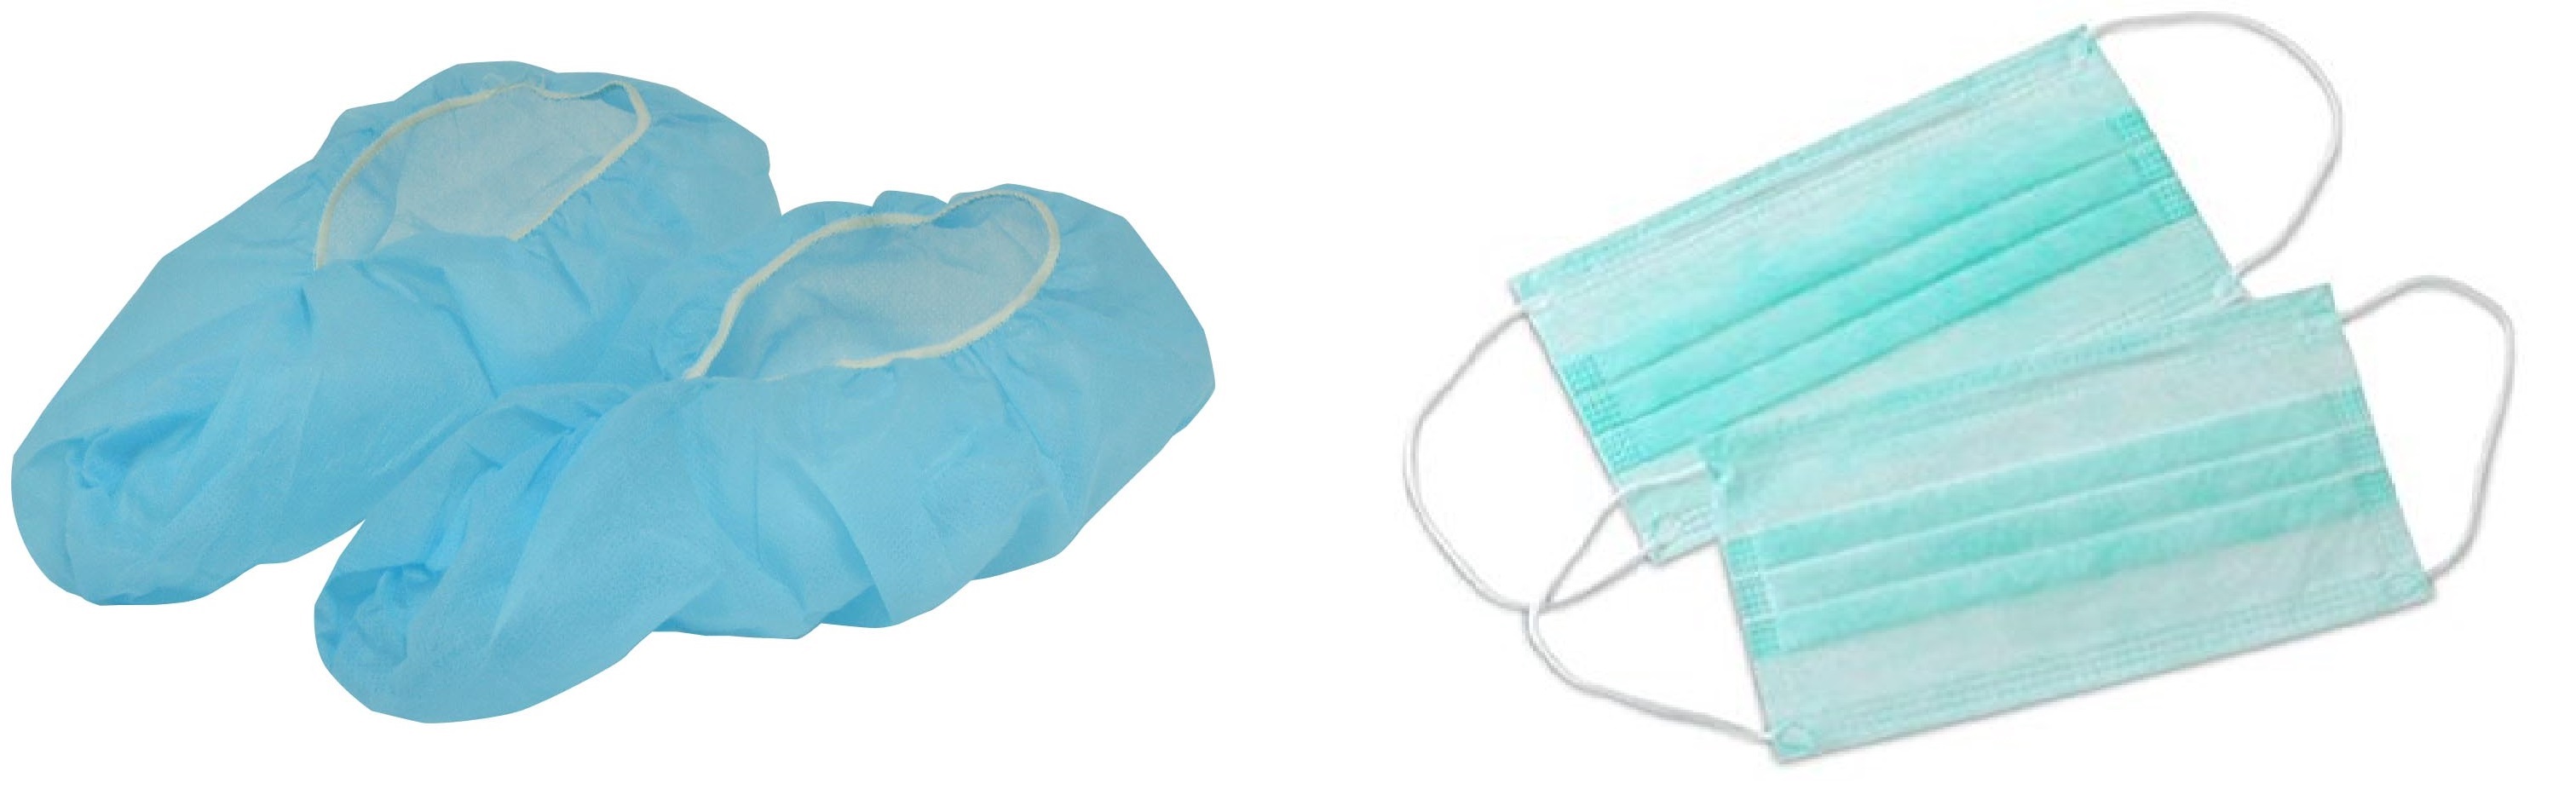 Nonwoven fabric operating room shoe covers and masks